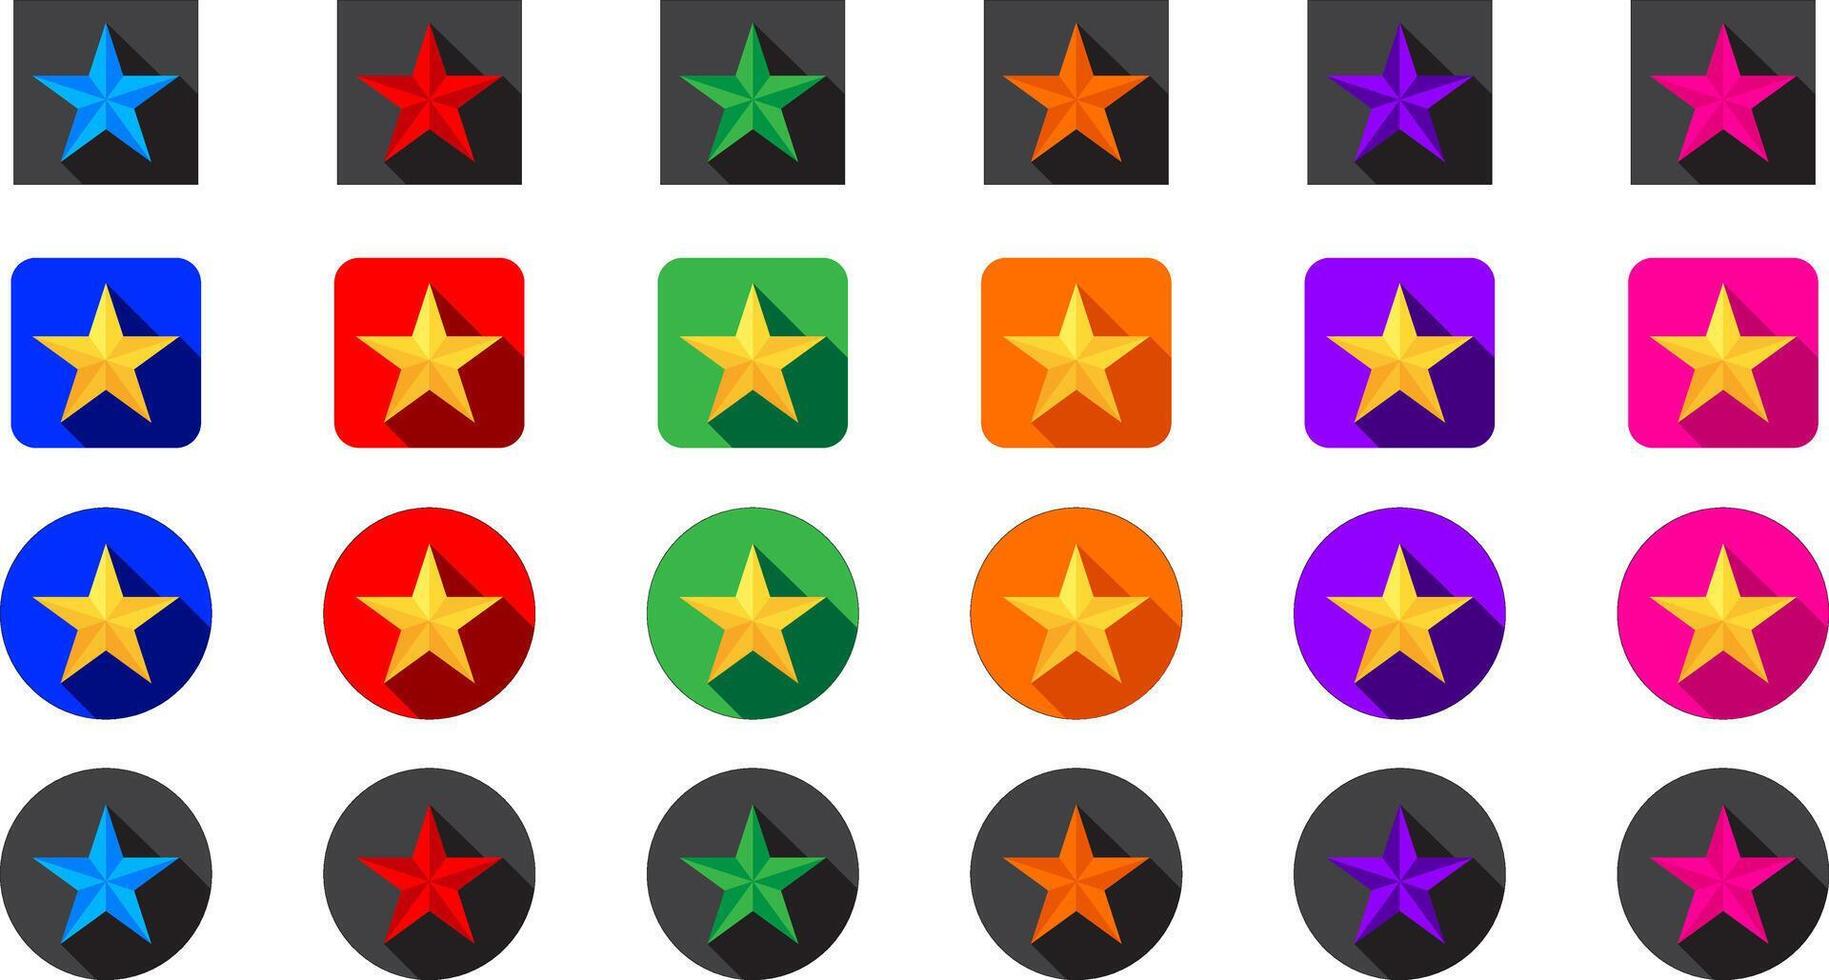 Gold and colorful star in circle and rectangle in blue, red, green, orange, purple, and pink colors with dark shadow vector